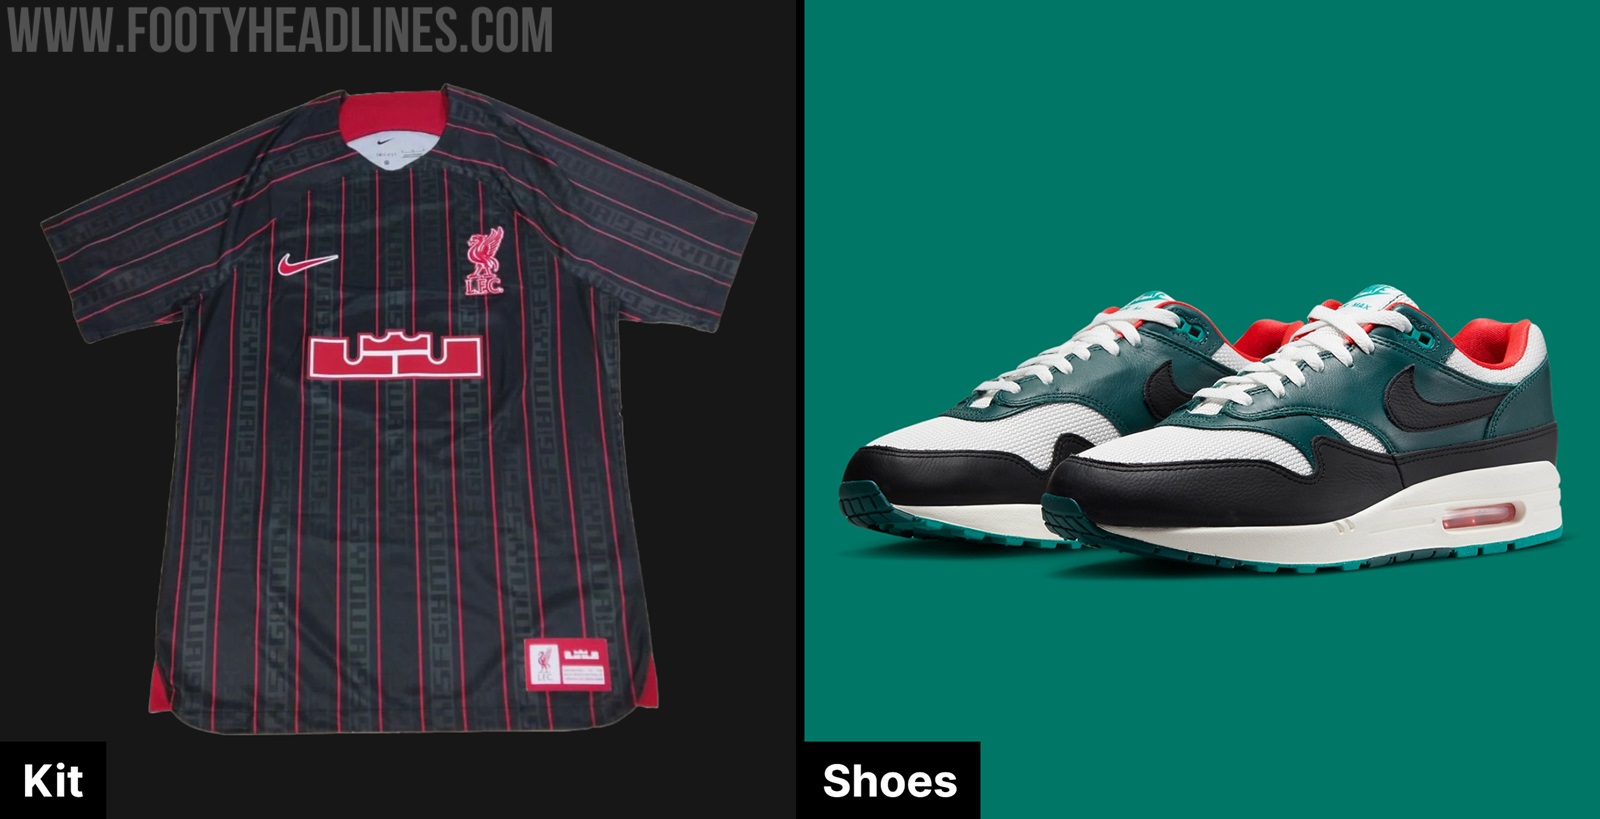 LeBron James and Liverpool kit: Nike set for special collaboration